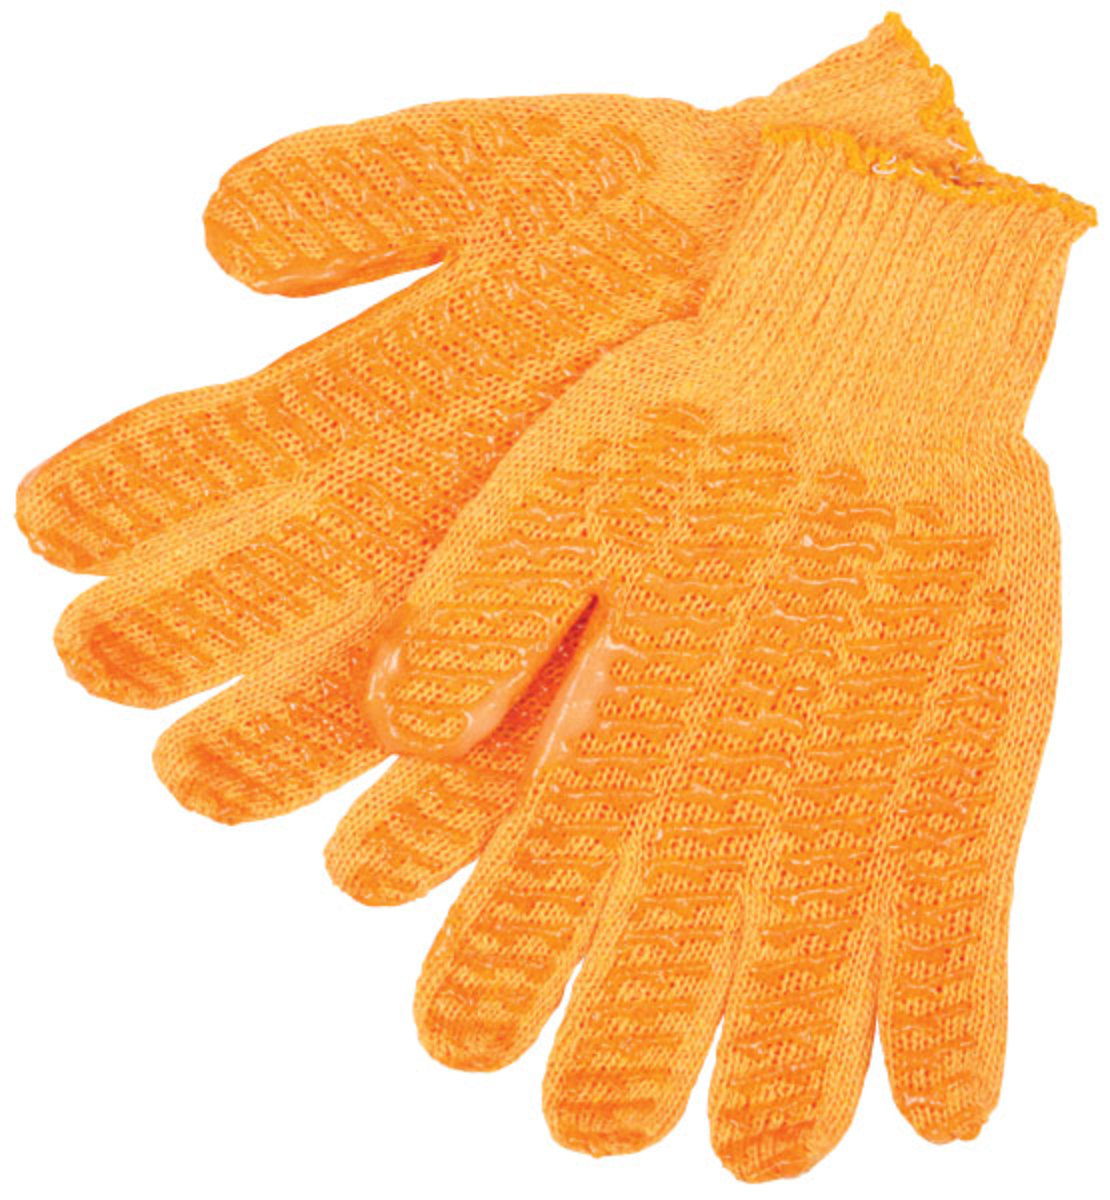 Memphis Glove Orange Large 7 Gauge Cotton And Polyester String Knit Work Gloves With Knit Wrist